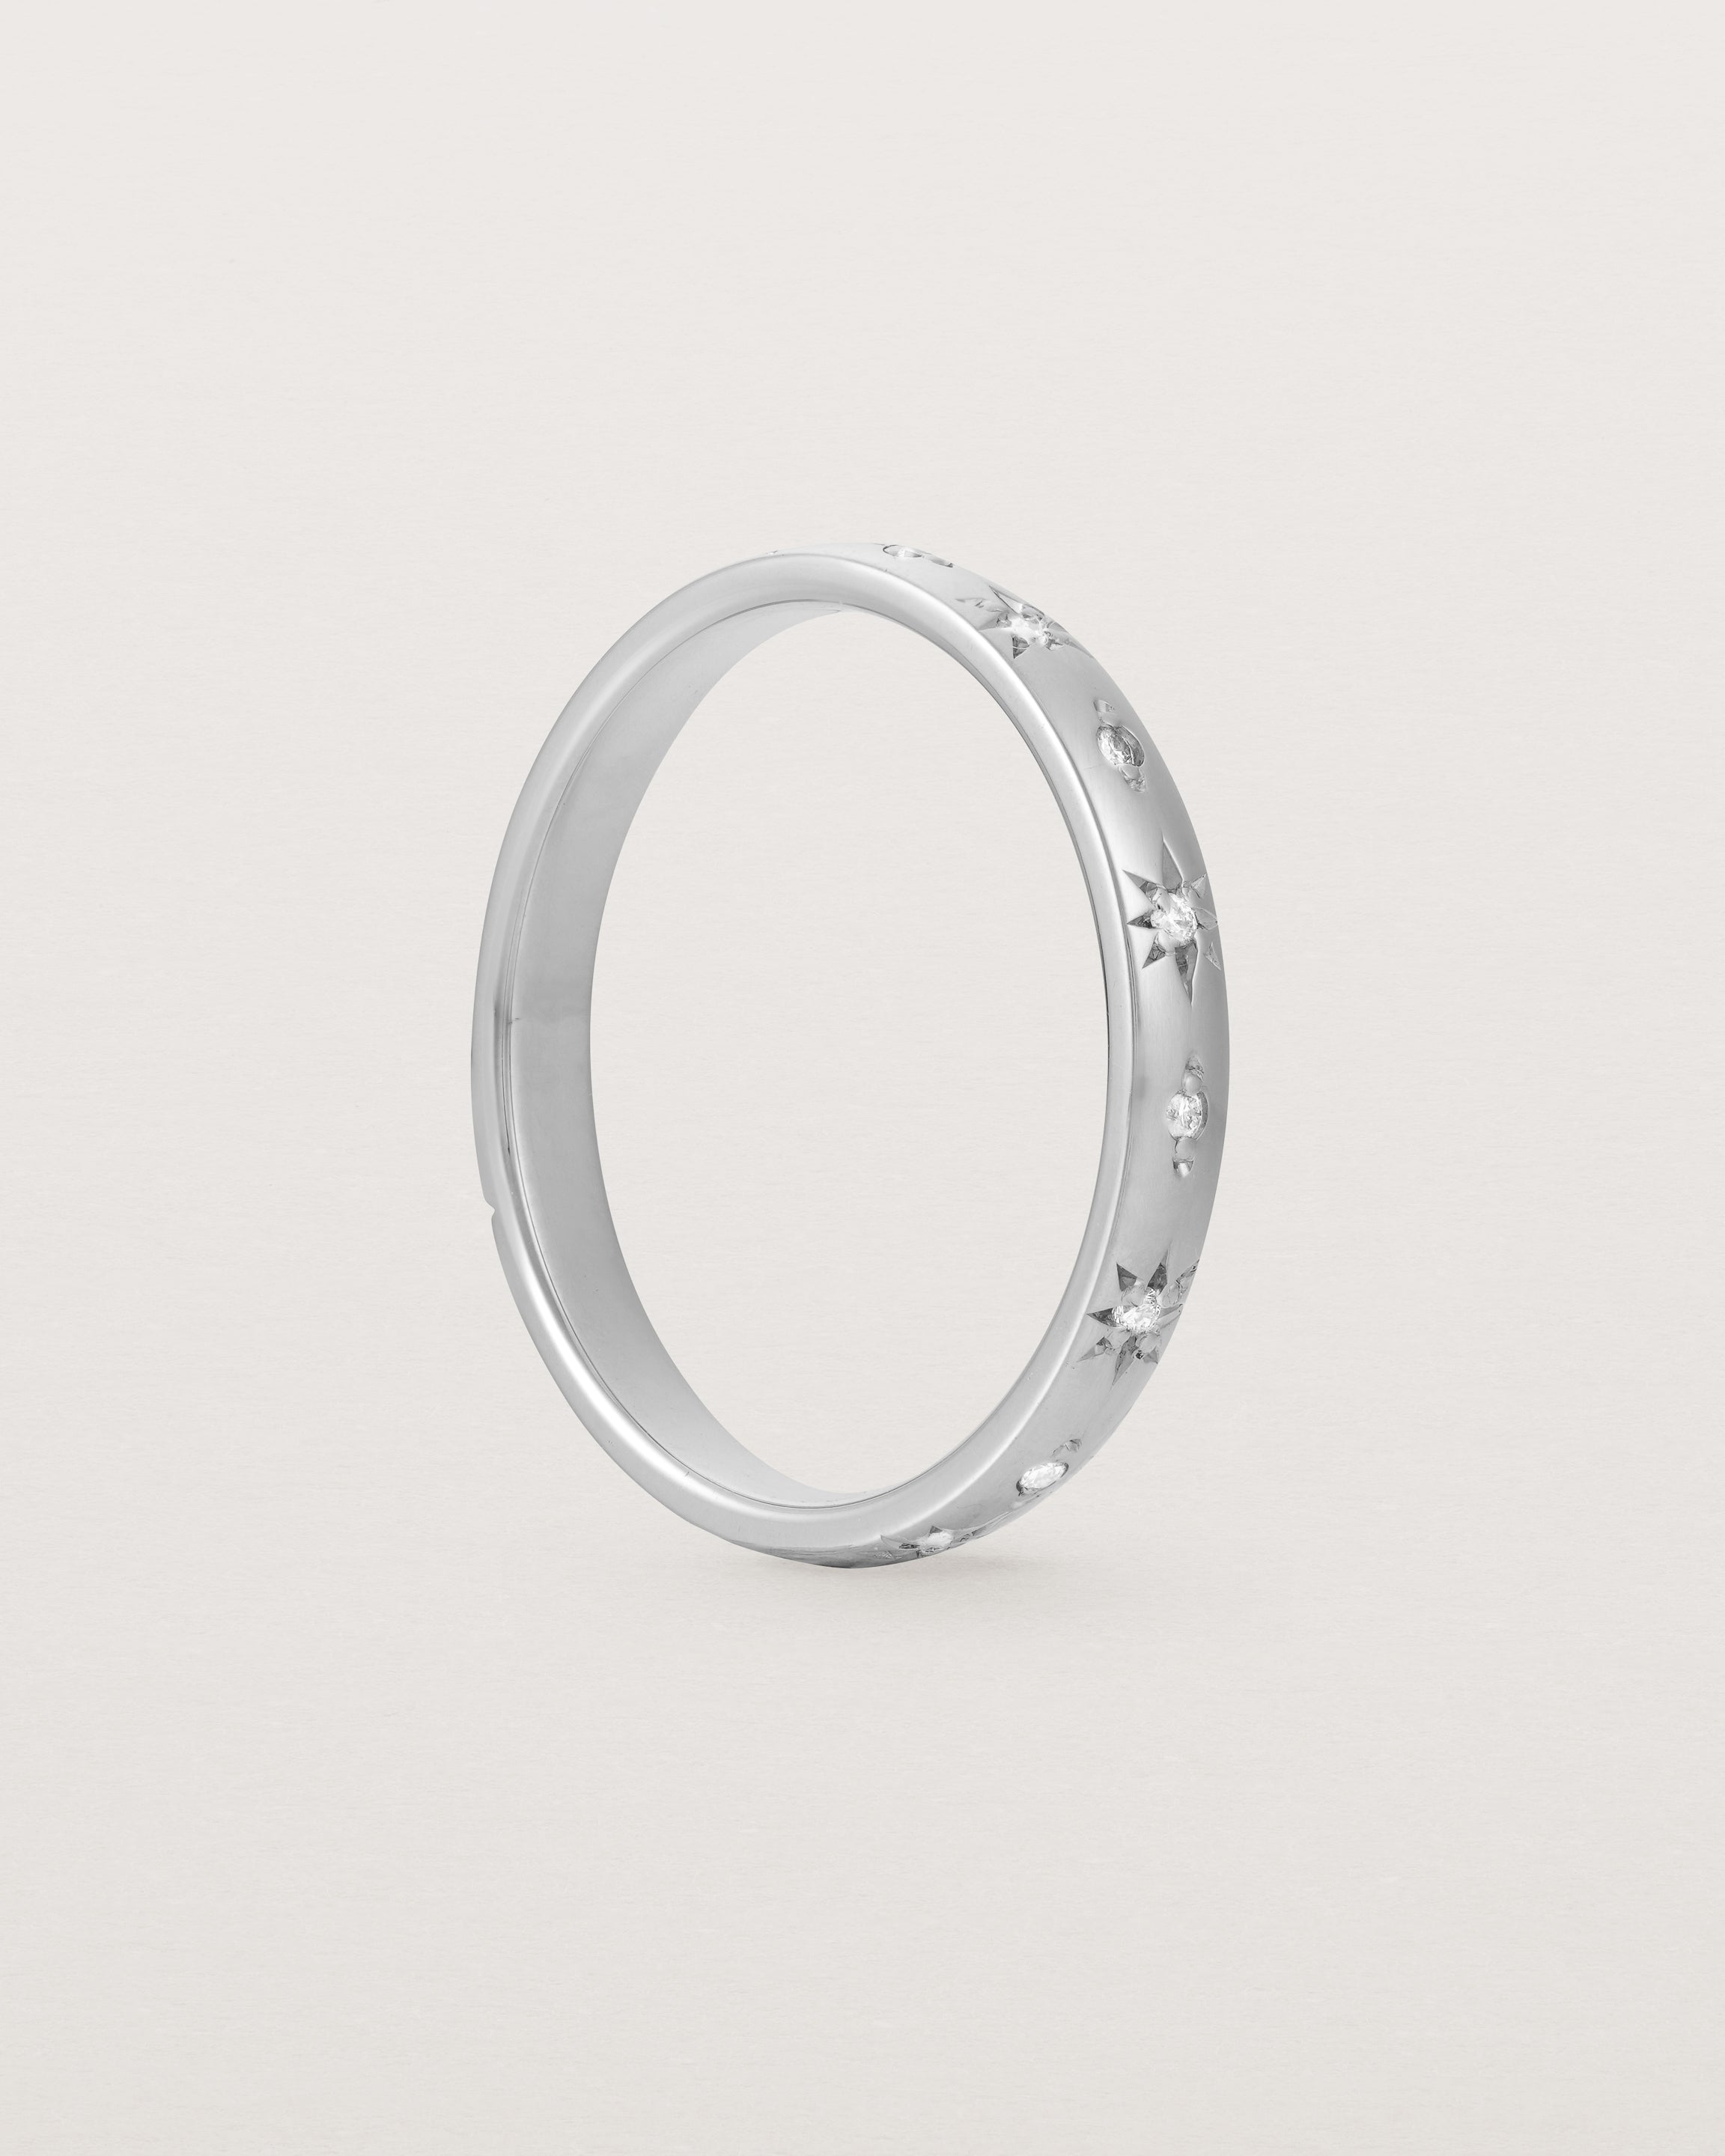 Standing view of the Leilani Ring | Diamonds | White Gold. 